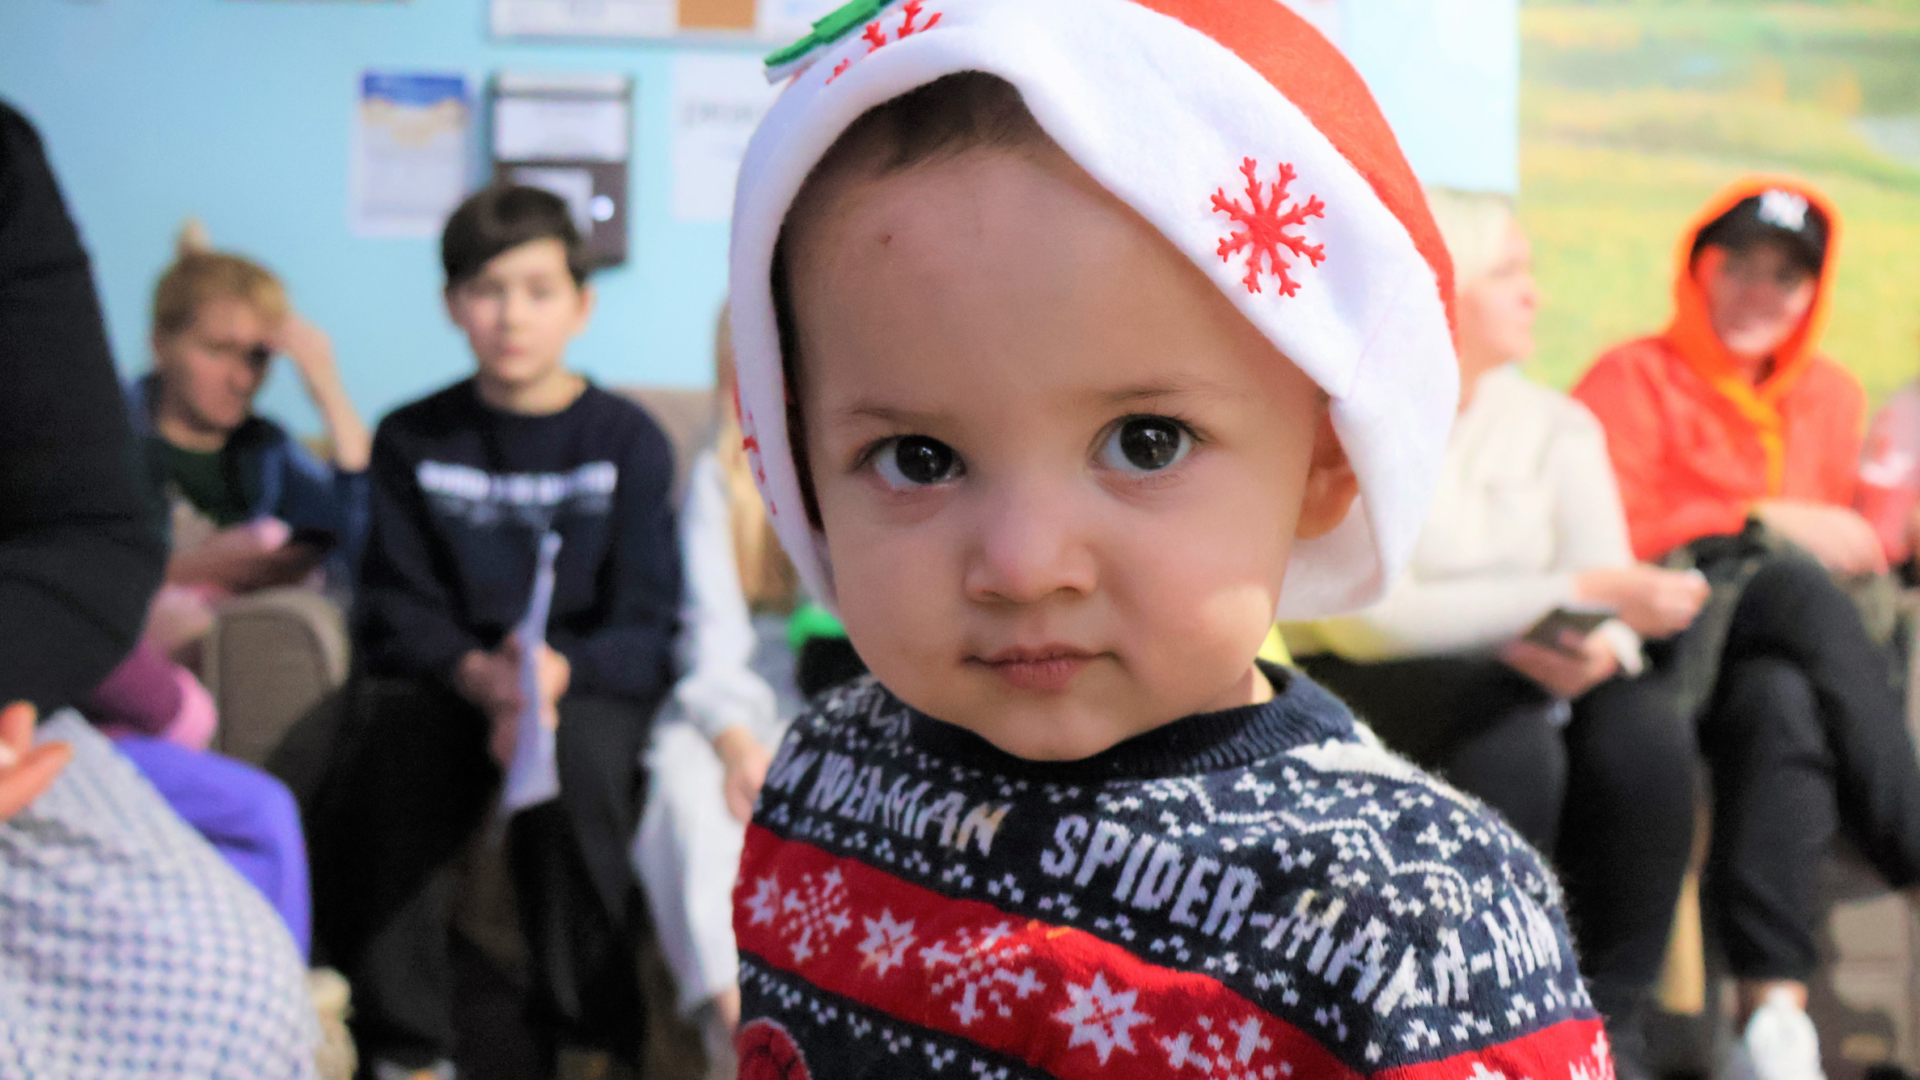 Image is of a young children in a Santa hat and Christmas jumper